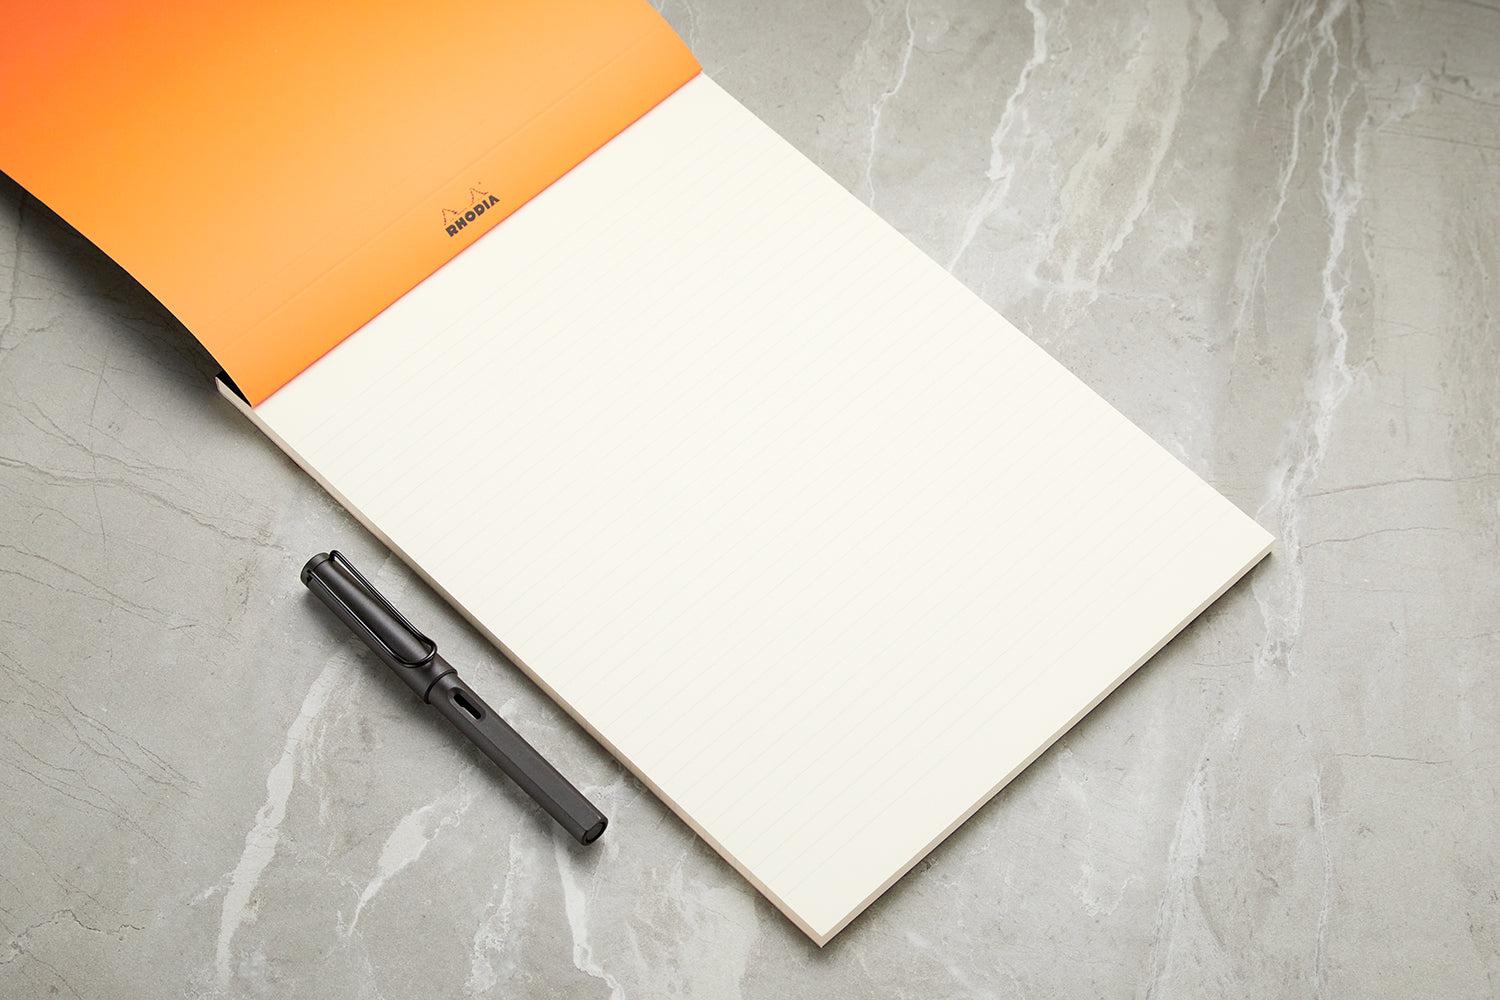 Rhodia No. 18 Notepad (A4, 8.25 x 11.75) – The Pleasure of Writing